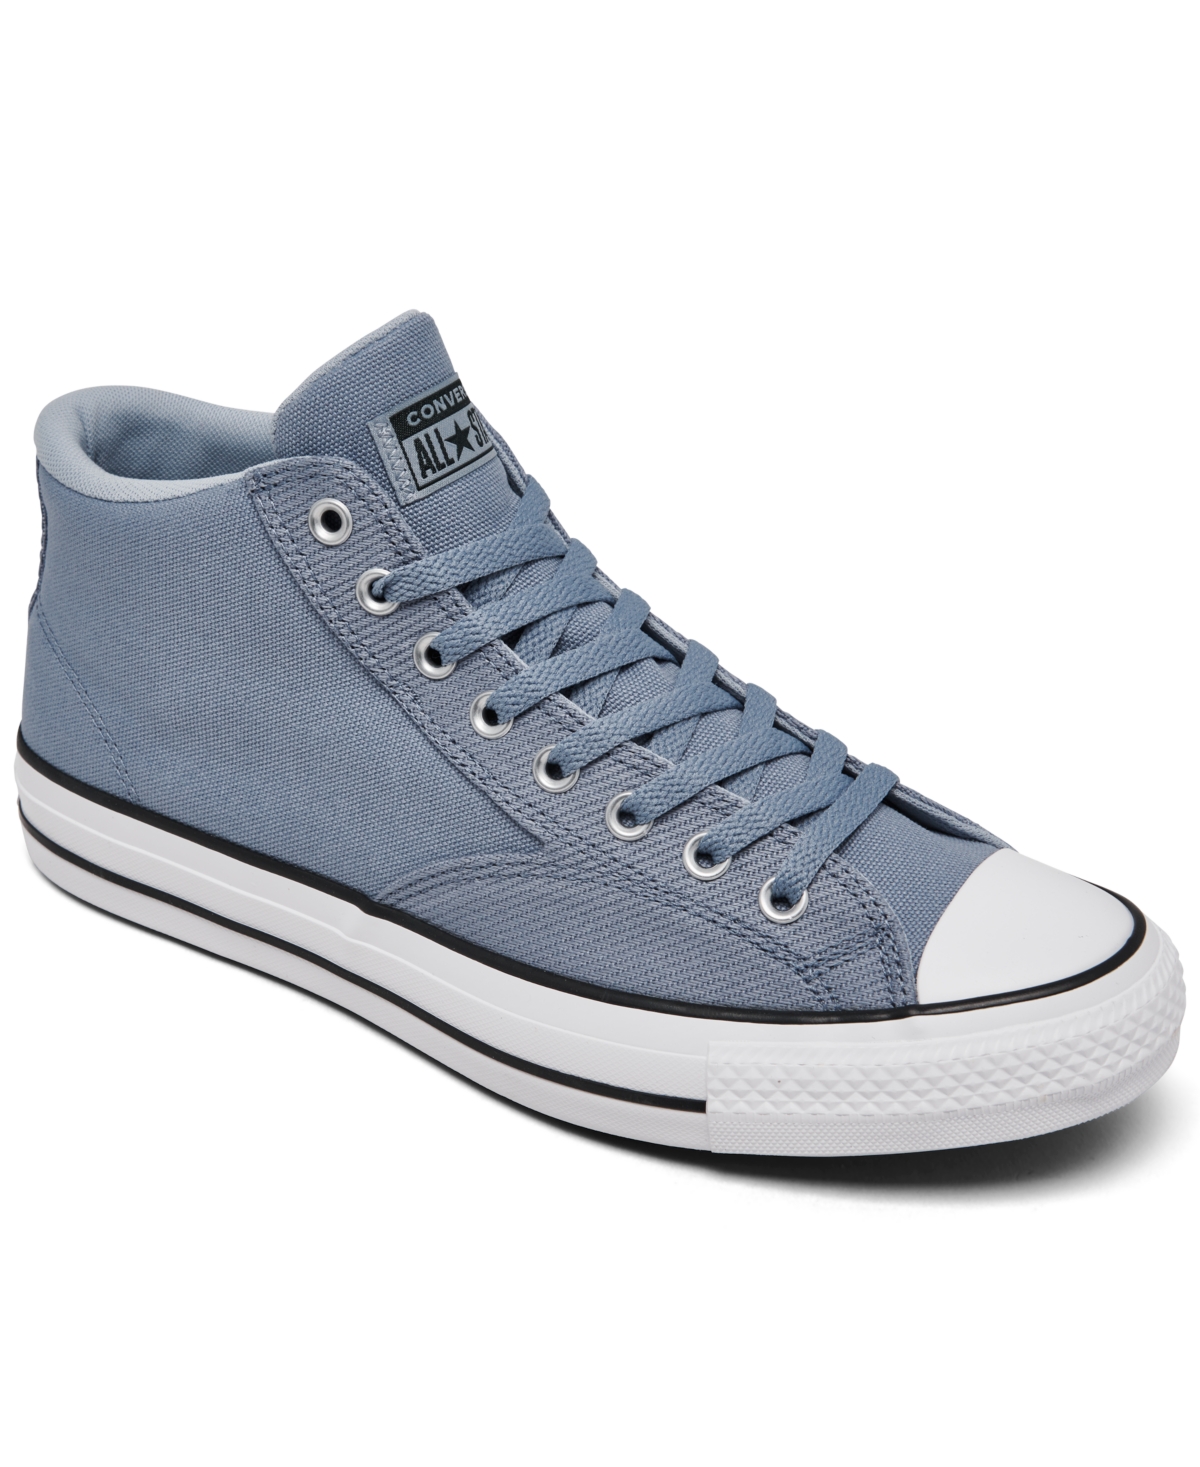 Converse Men's Chuck Taylor All Star Malden Street Casual Sneakers From Finish Line In Thunder Daze Blue,rainy Daze